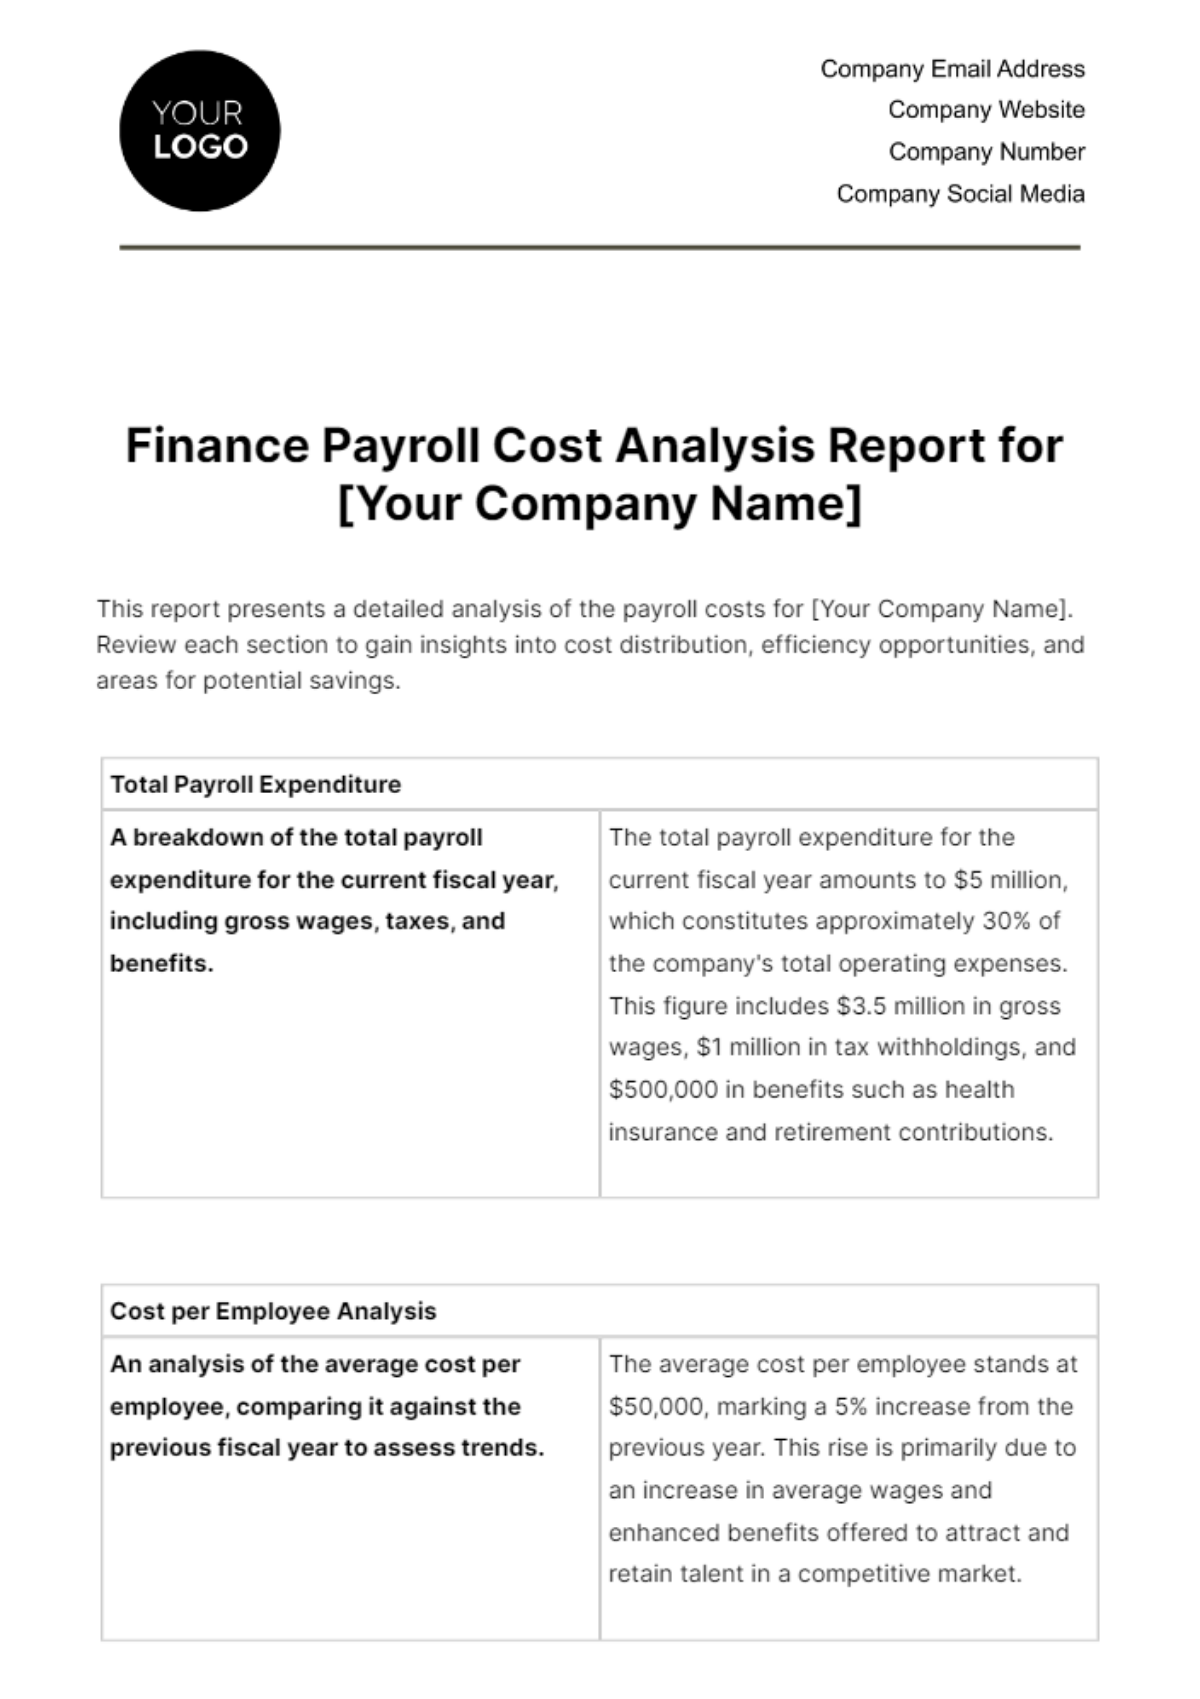 Free Finance Payroll Cost Analysis Report Template